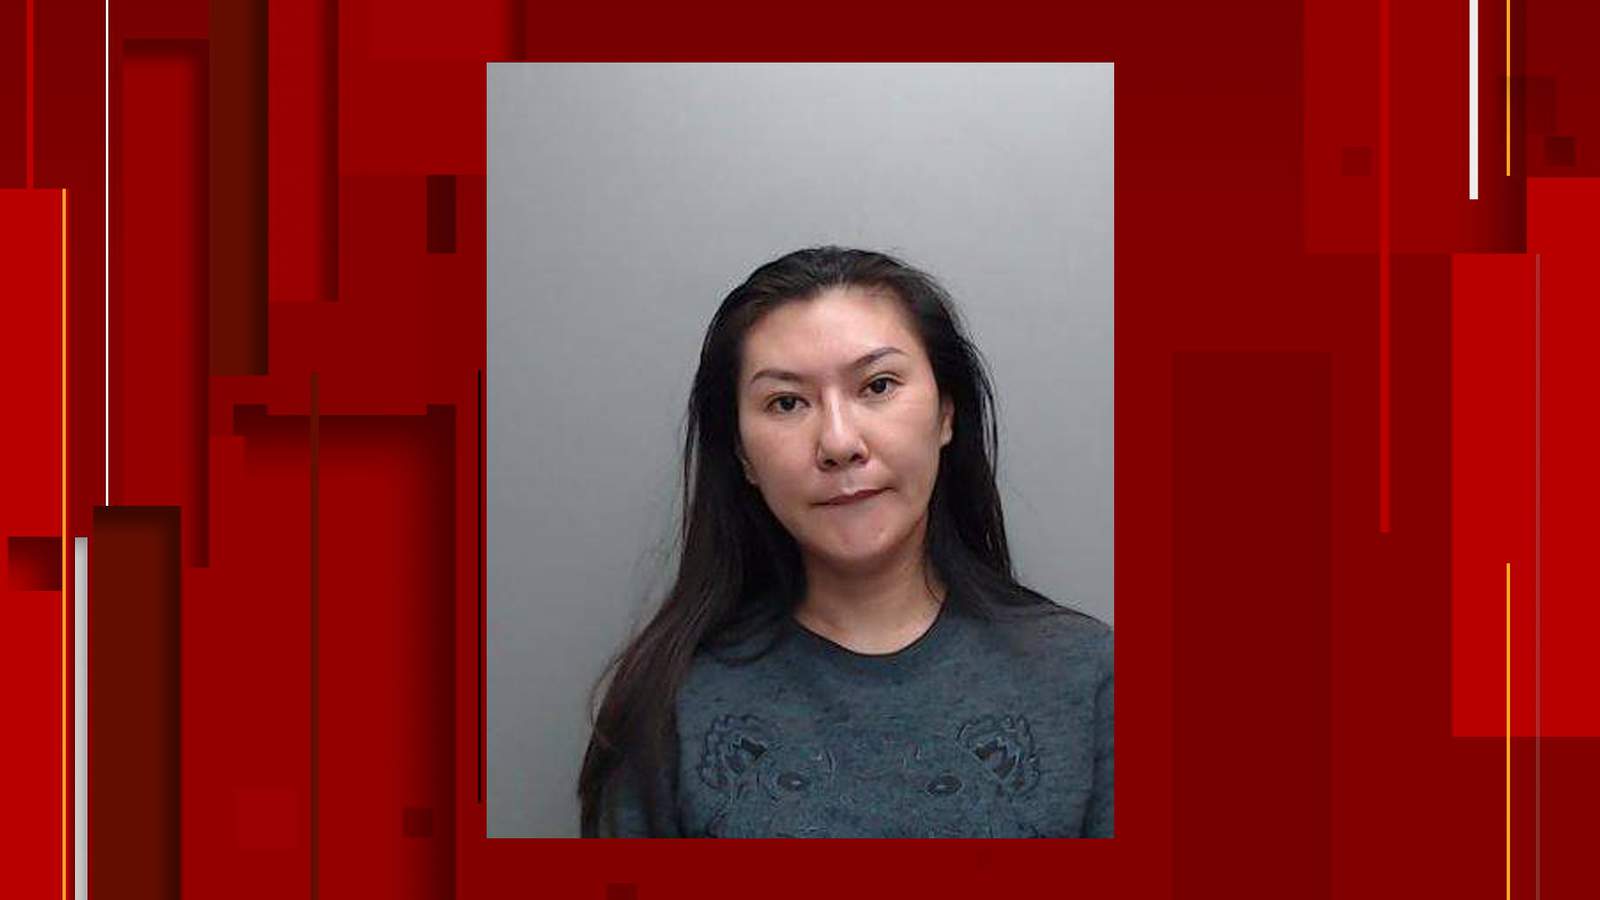 Woman arrested, charged with trafficking at San Marcos spa, deputies say